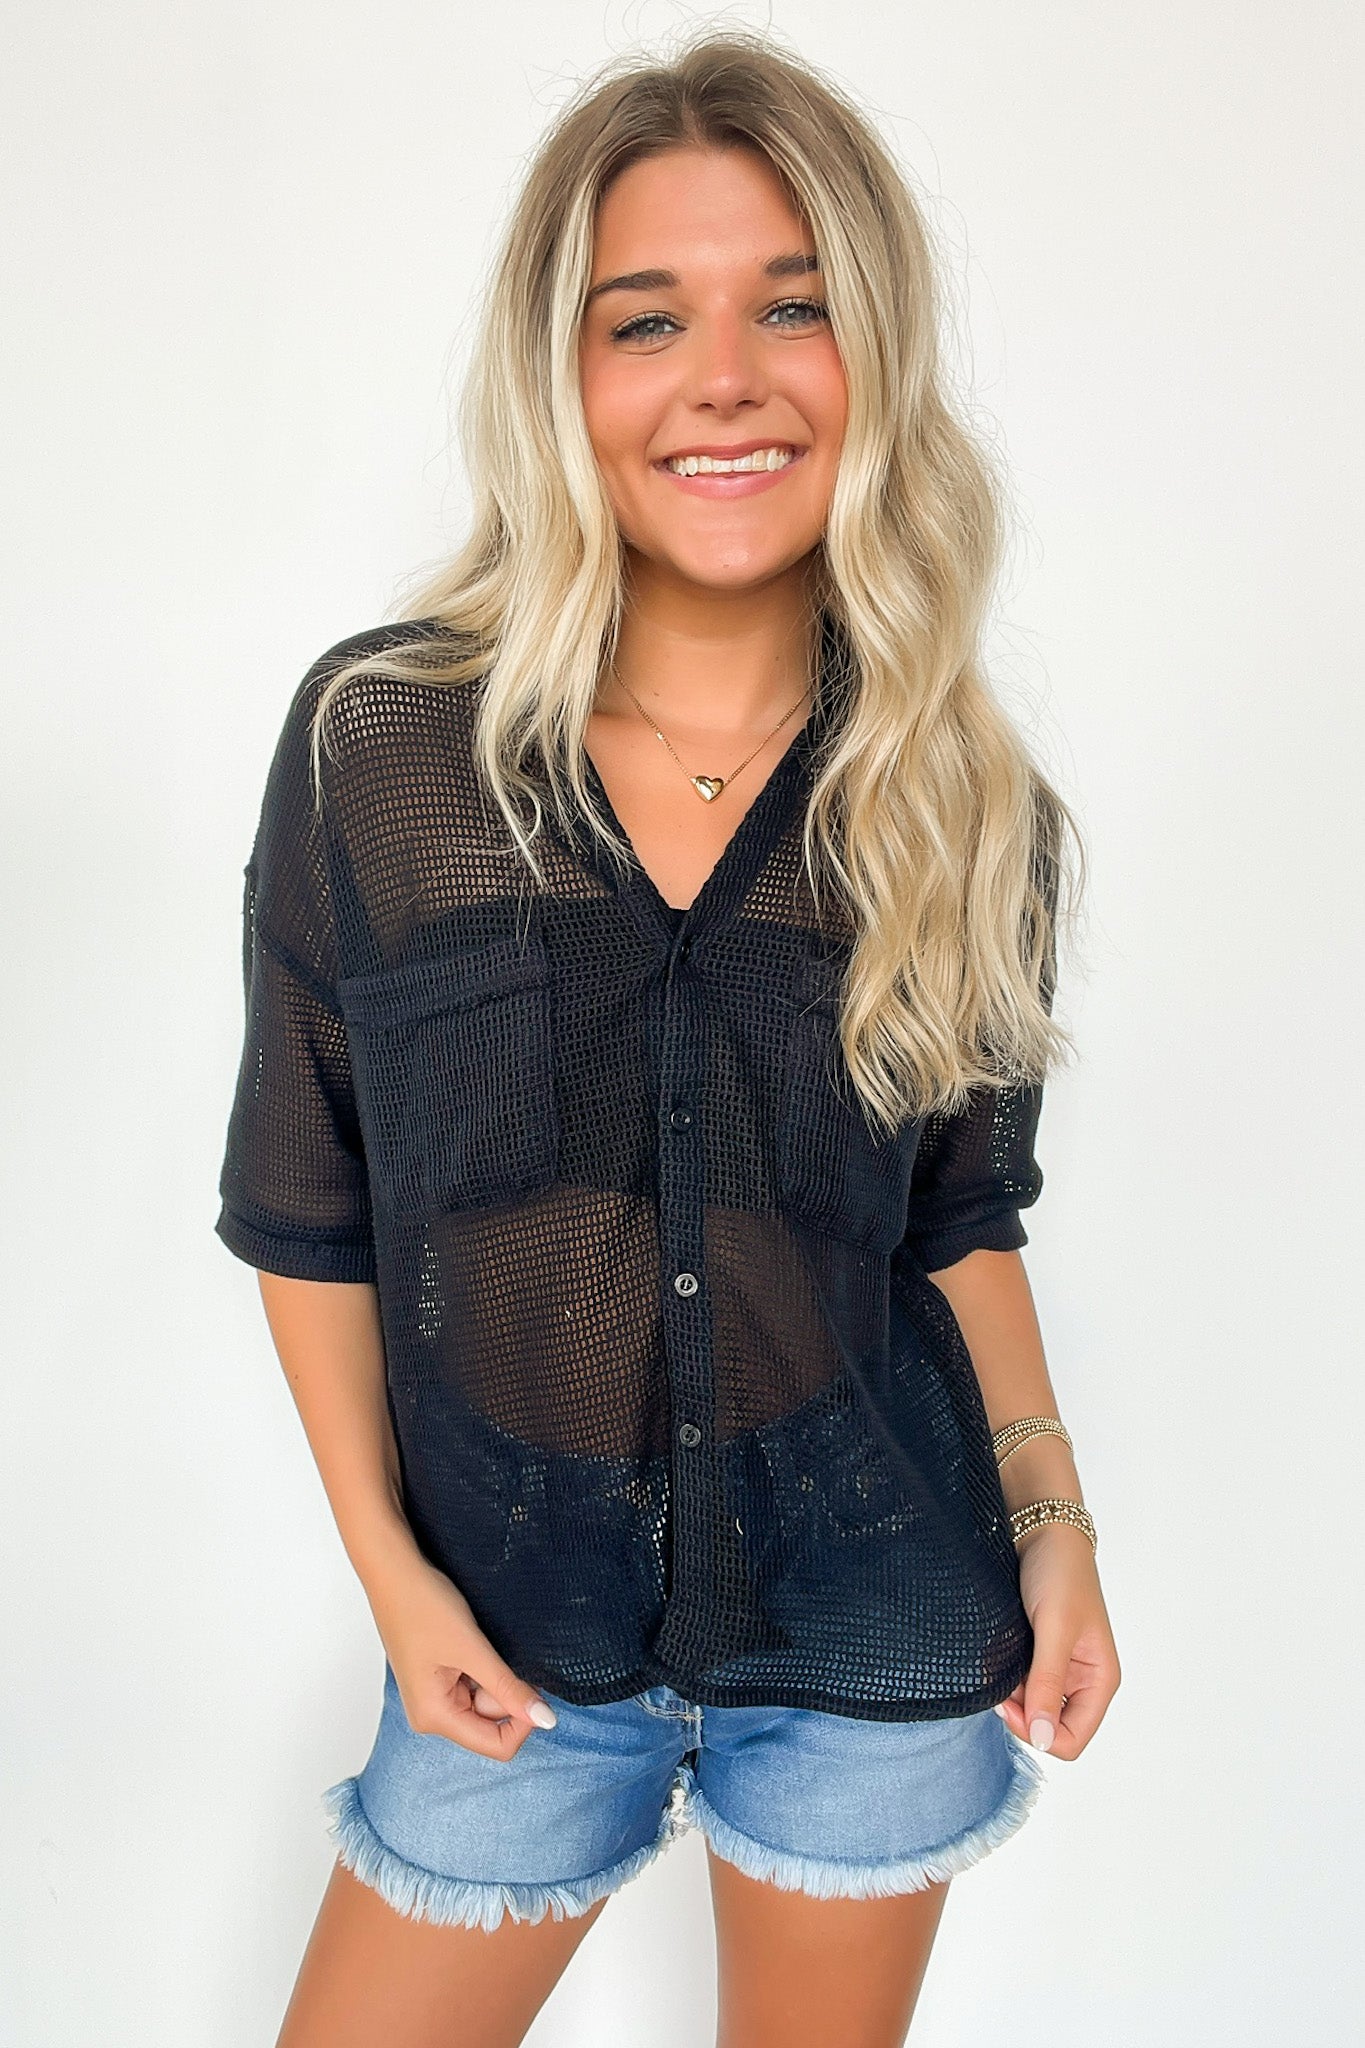  Dennington Short Sleeve Open Knit Button Down Top - Madison and Mallory